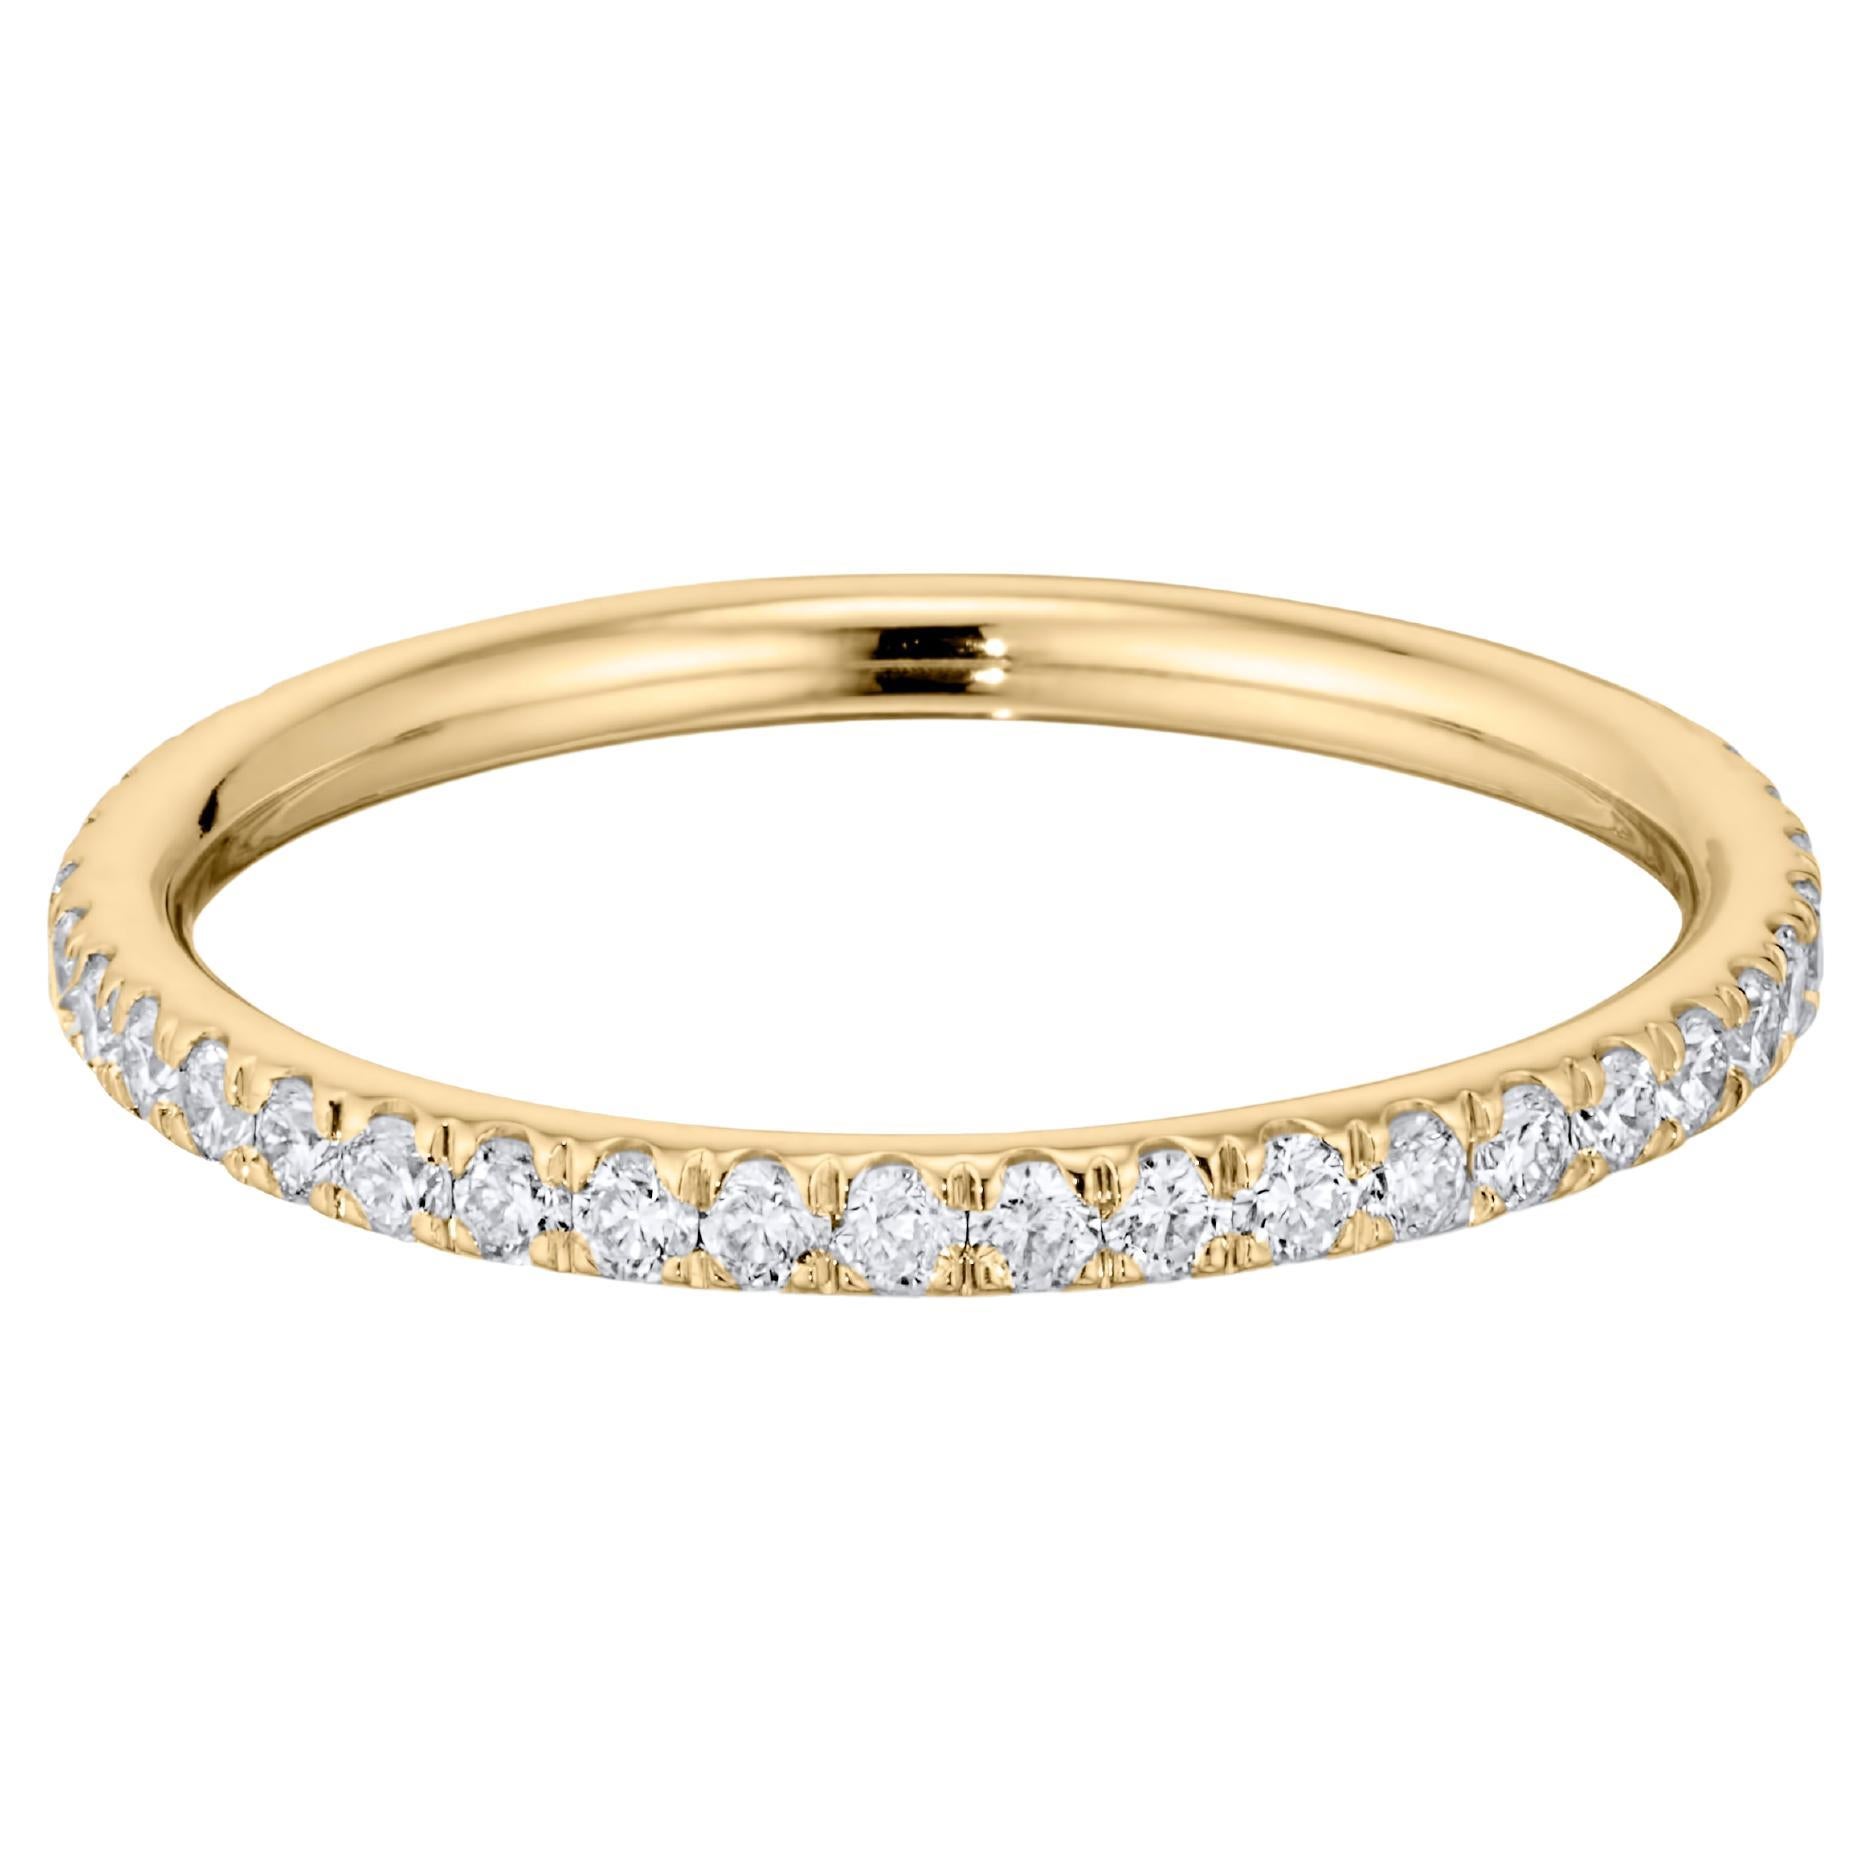 If you’re looking to find the perfect wedding band or simply something to brighten up your ring stack, our Diamond Eternity Band is super versatile. The ring is set with 0.56 carats of round brilliant-cut diamonds and mounted in 18K yellow gold. It